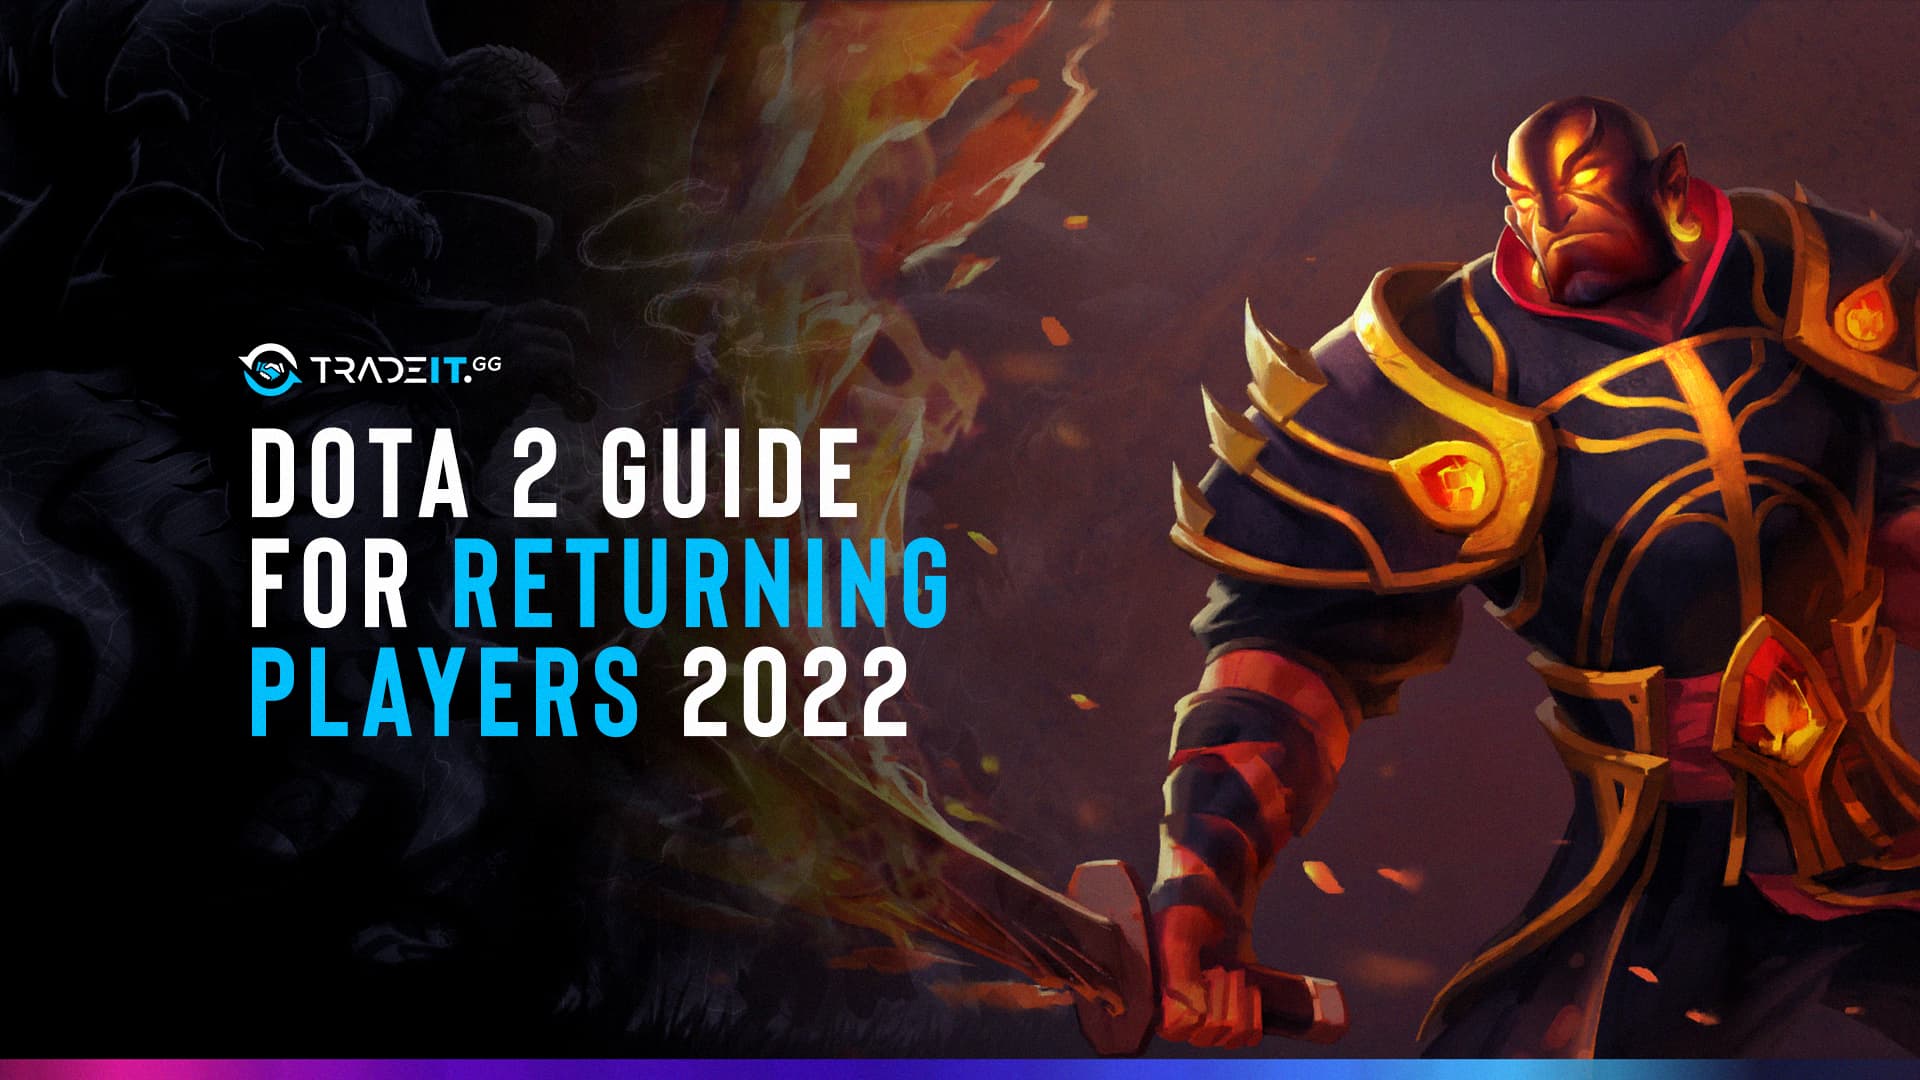 Dota 2 Guide for Returning Players 2022